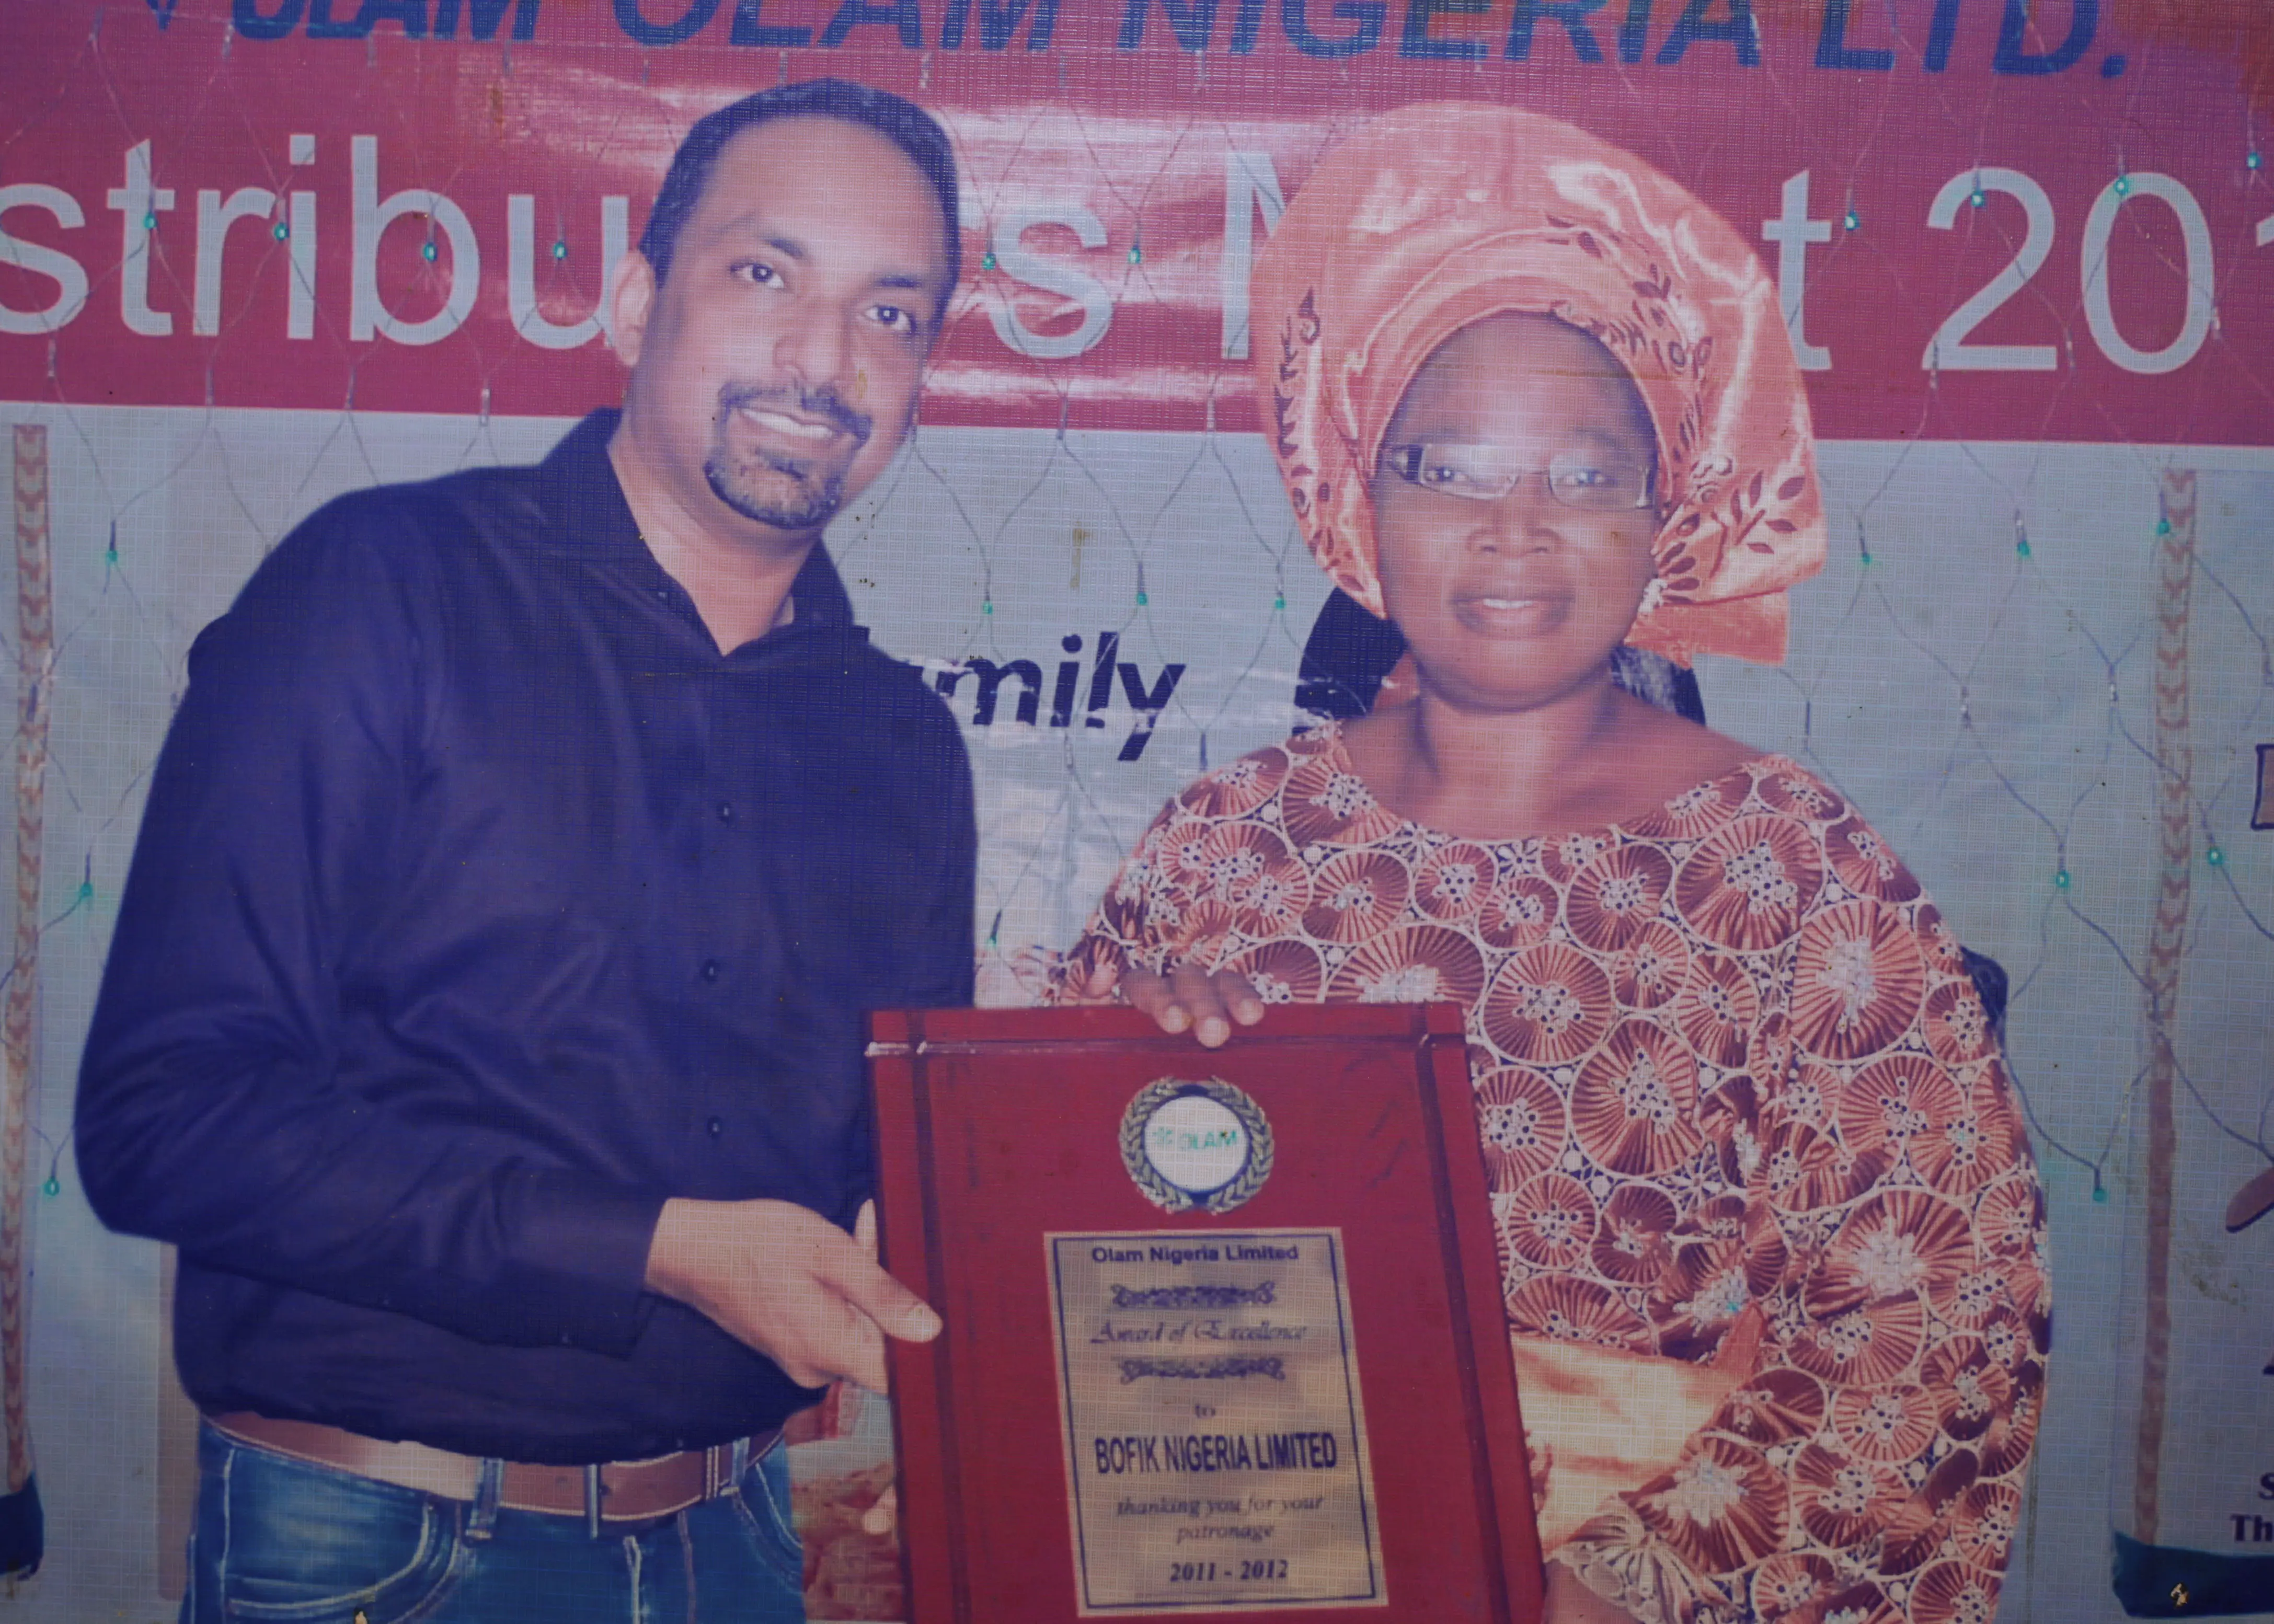 Olam Award for Excellence 2011/2012